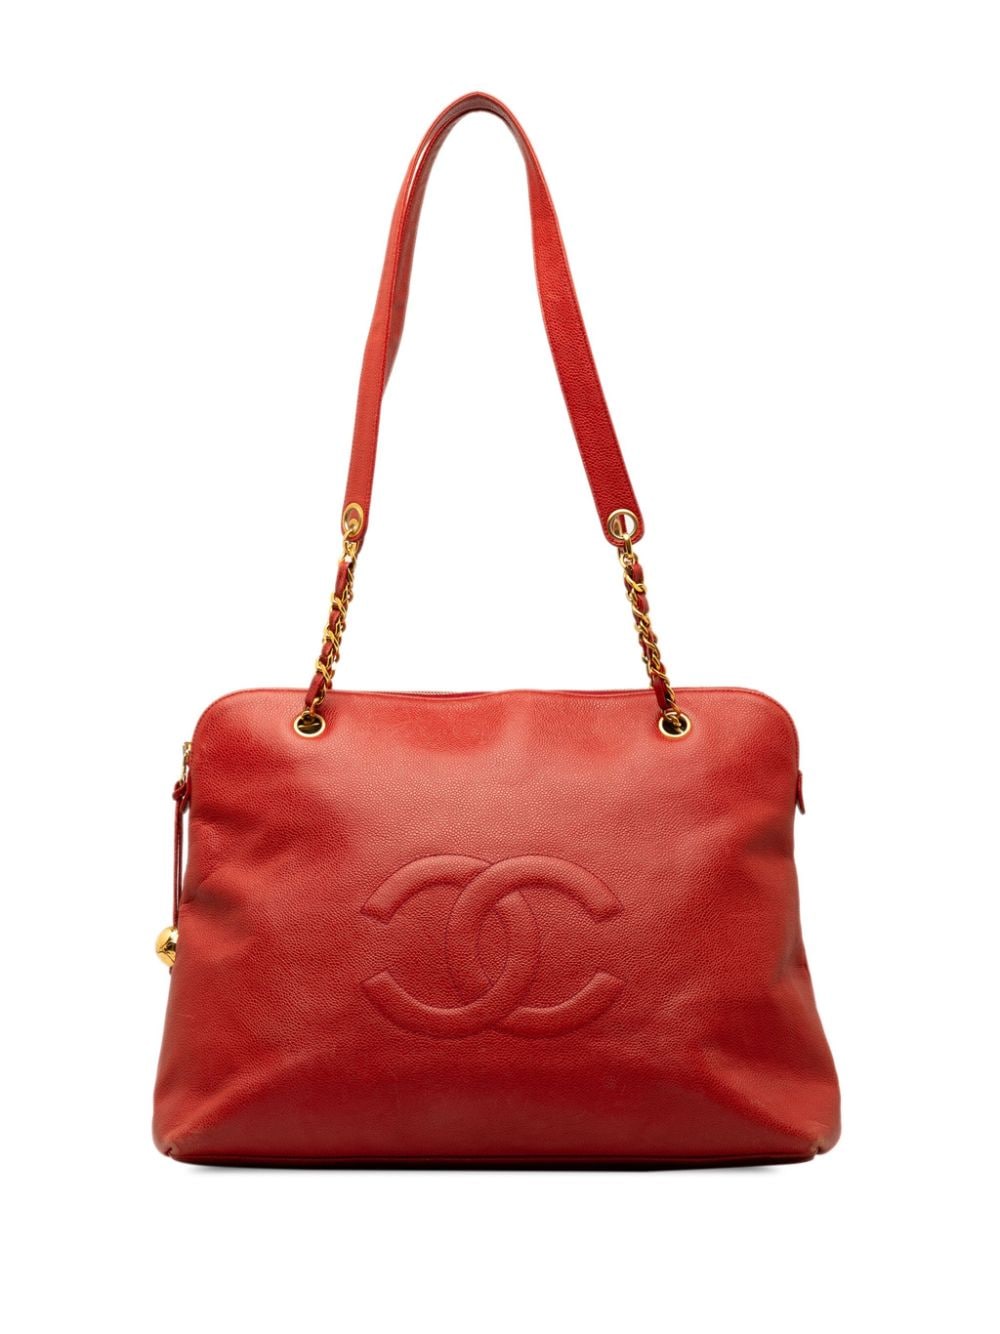 Pre-owned Chanel 1994-1996 Cc Caviar Shoulder Bag In Red